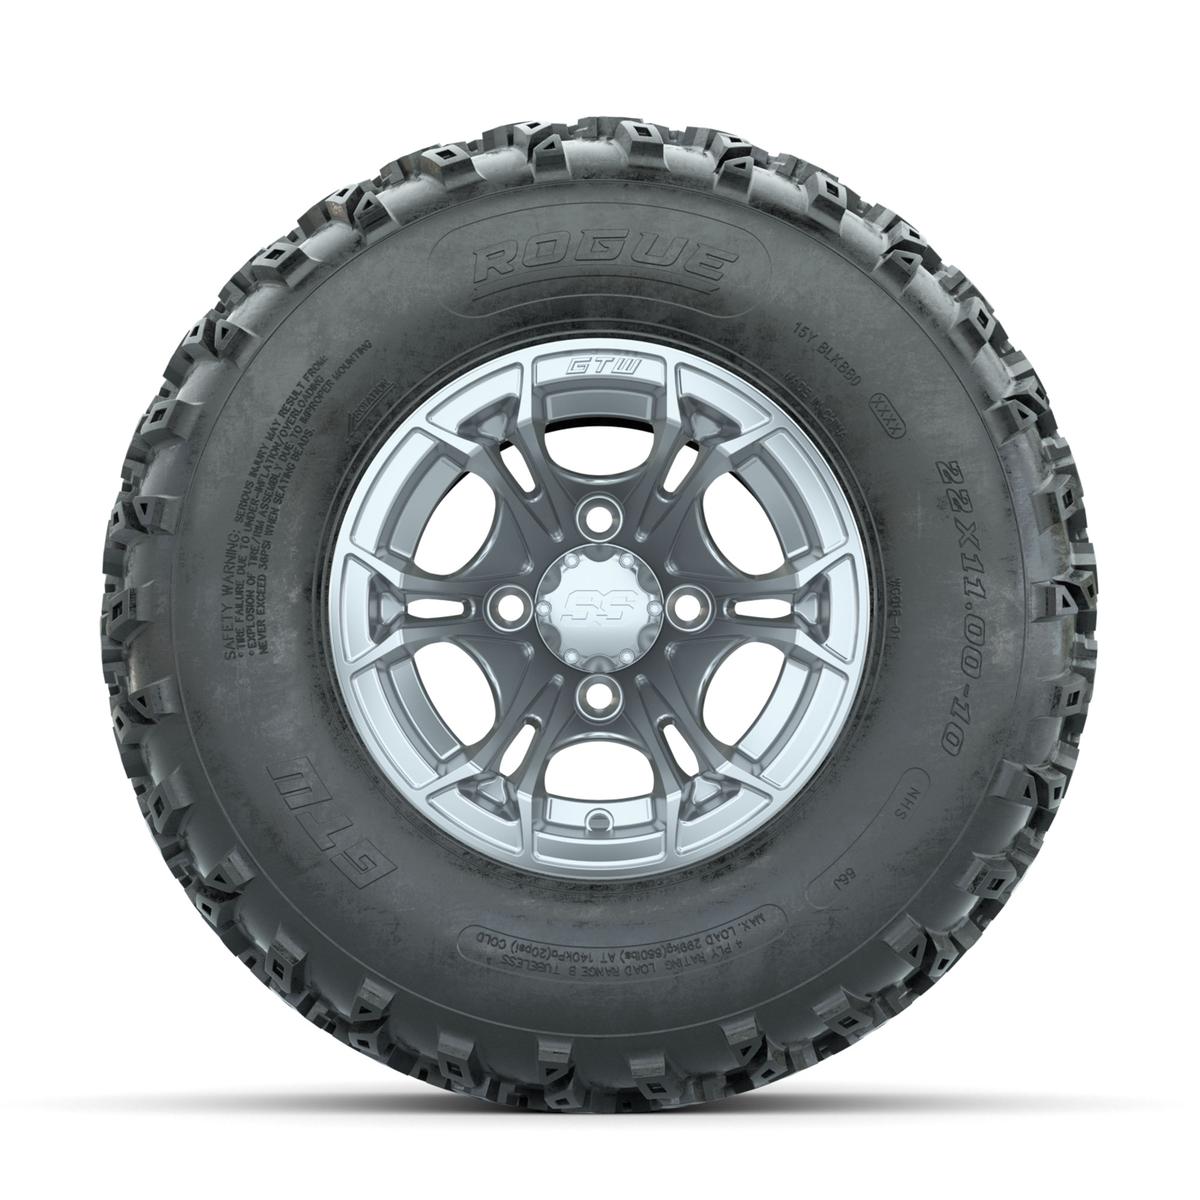 GTW Spyder Silver 10 in Wheels with 22x11.00-10 Rogue All Terrain Tires – Full Set